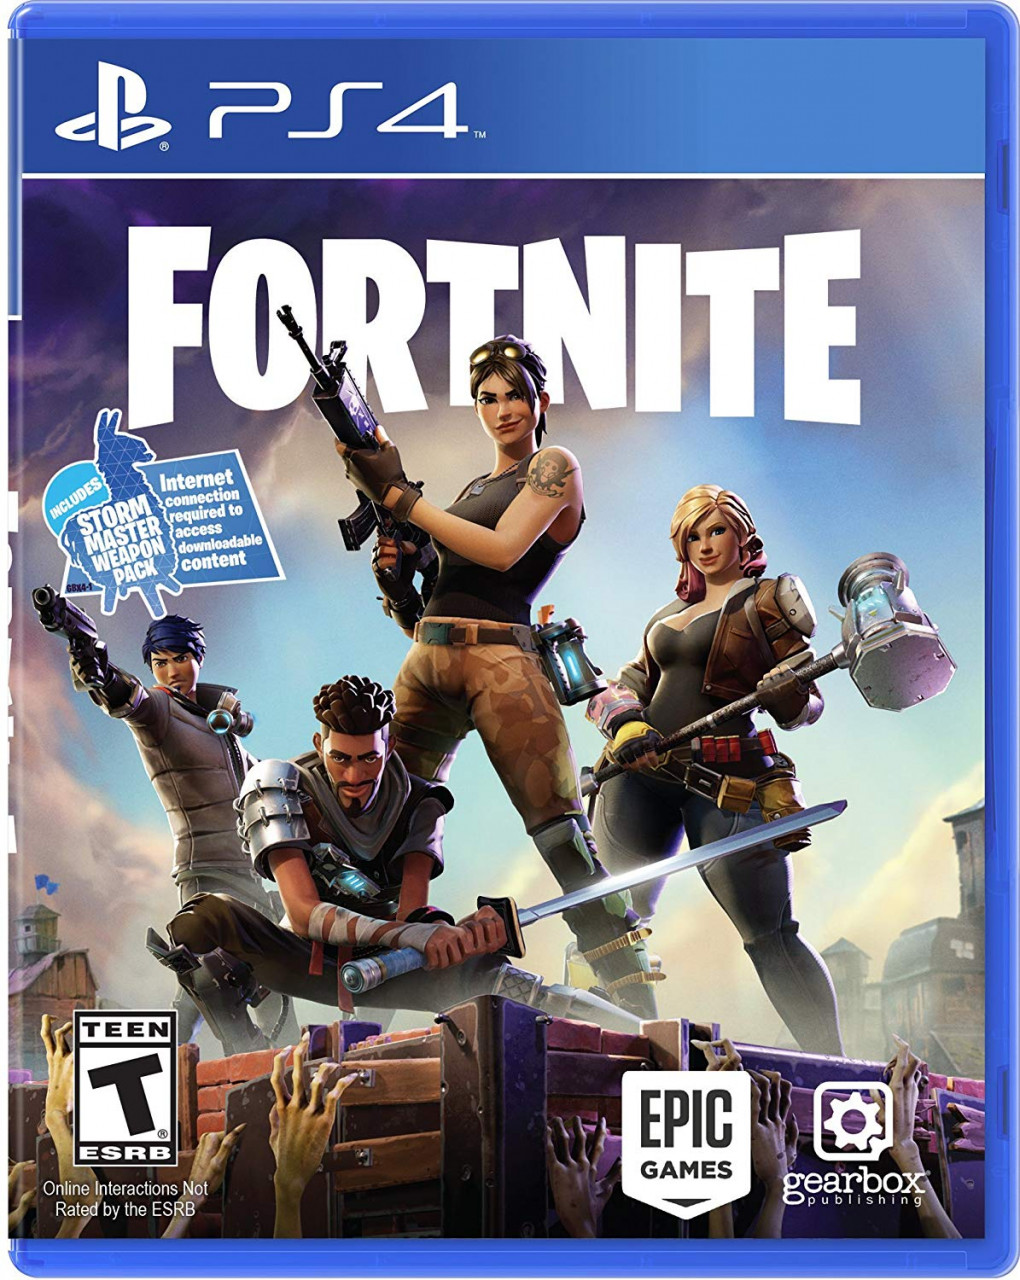 Fortnite Game Ps4 Playstation Price In Pakistan Homeshopping